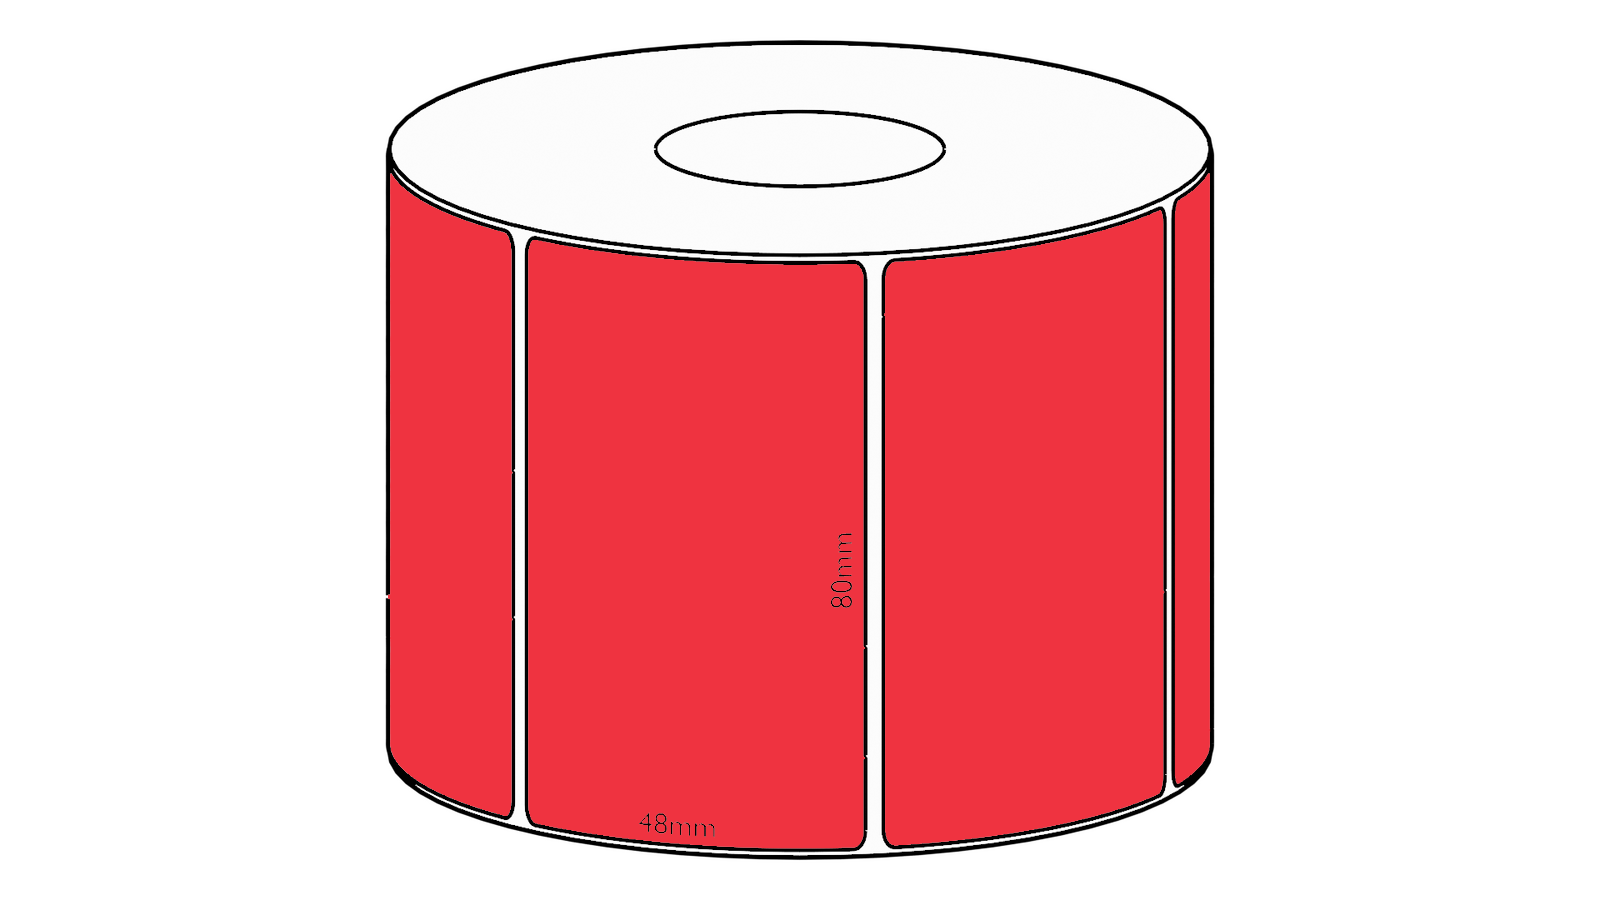 80x48mm Red Direct Thermal Permanent Label, 1000 per roll, 38mm core